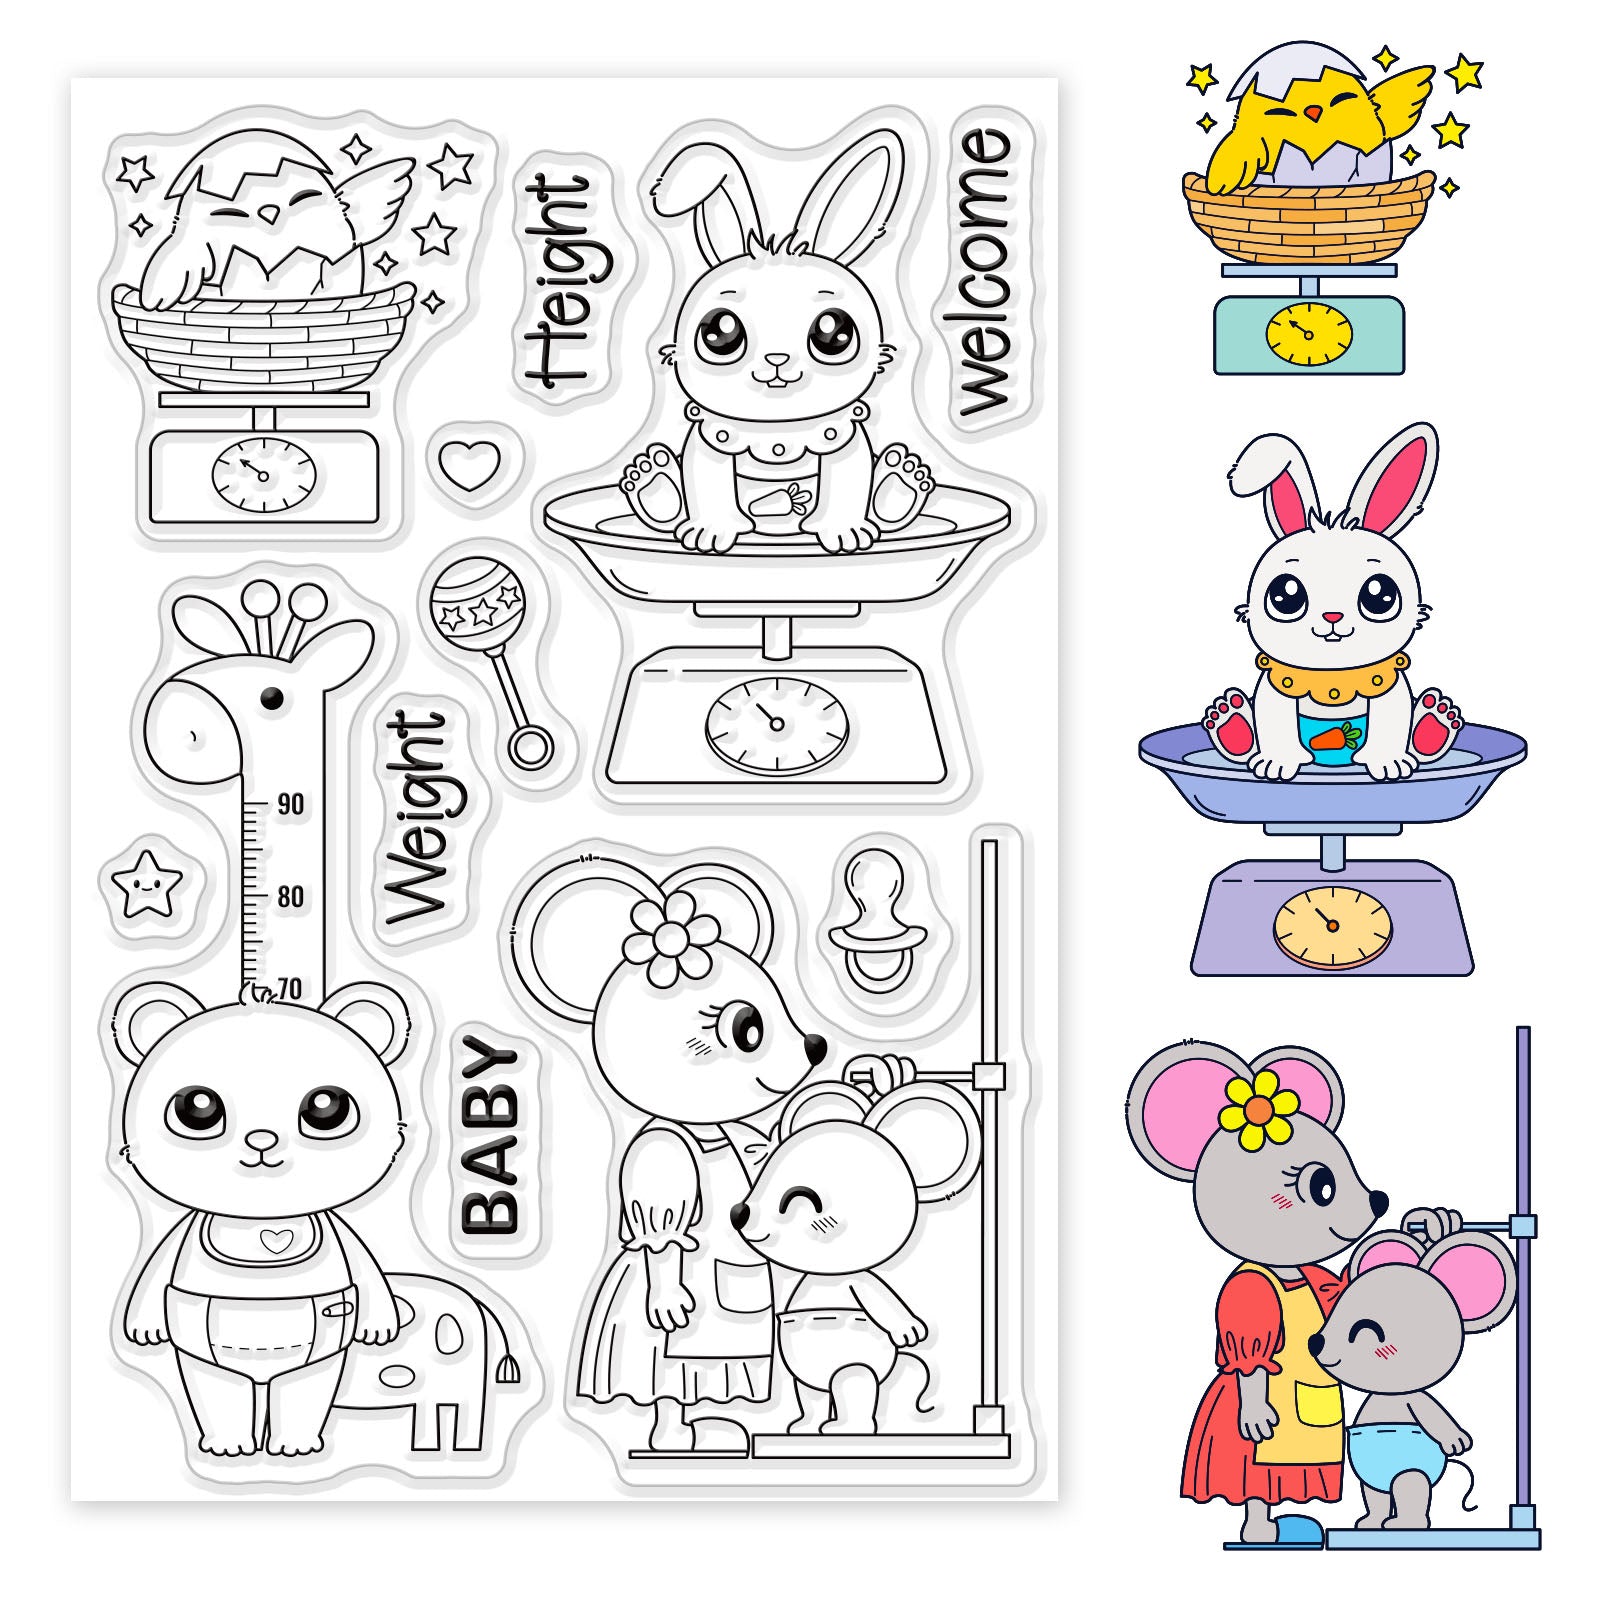 Globleland Animal, Baby, Weighing, Rabbit, Bear, Rat, Chicken Clear Silicone Stamp Seal for Card Making Decoration and DIY Scrapbooking